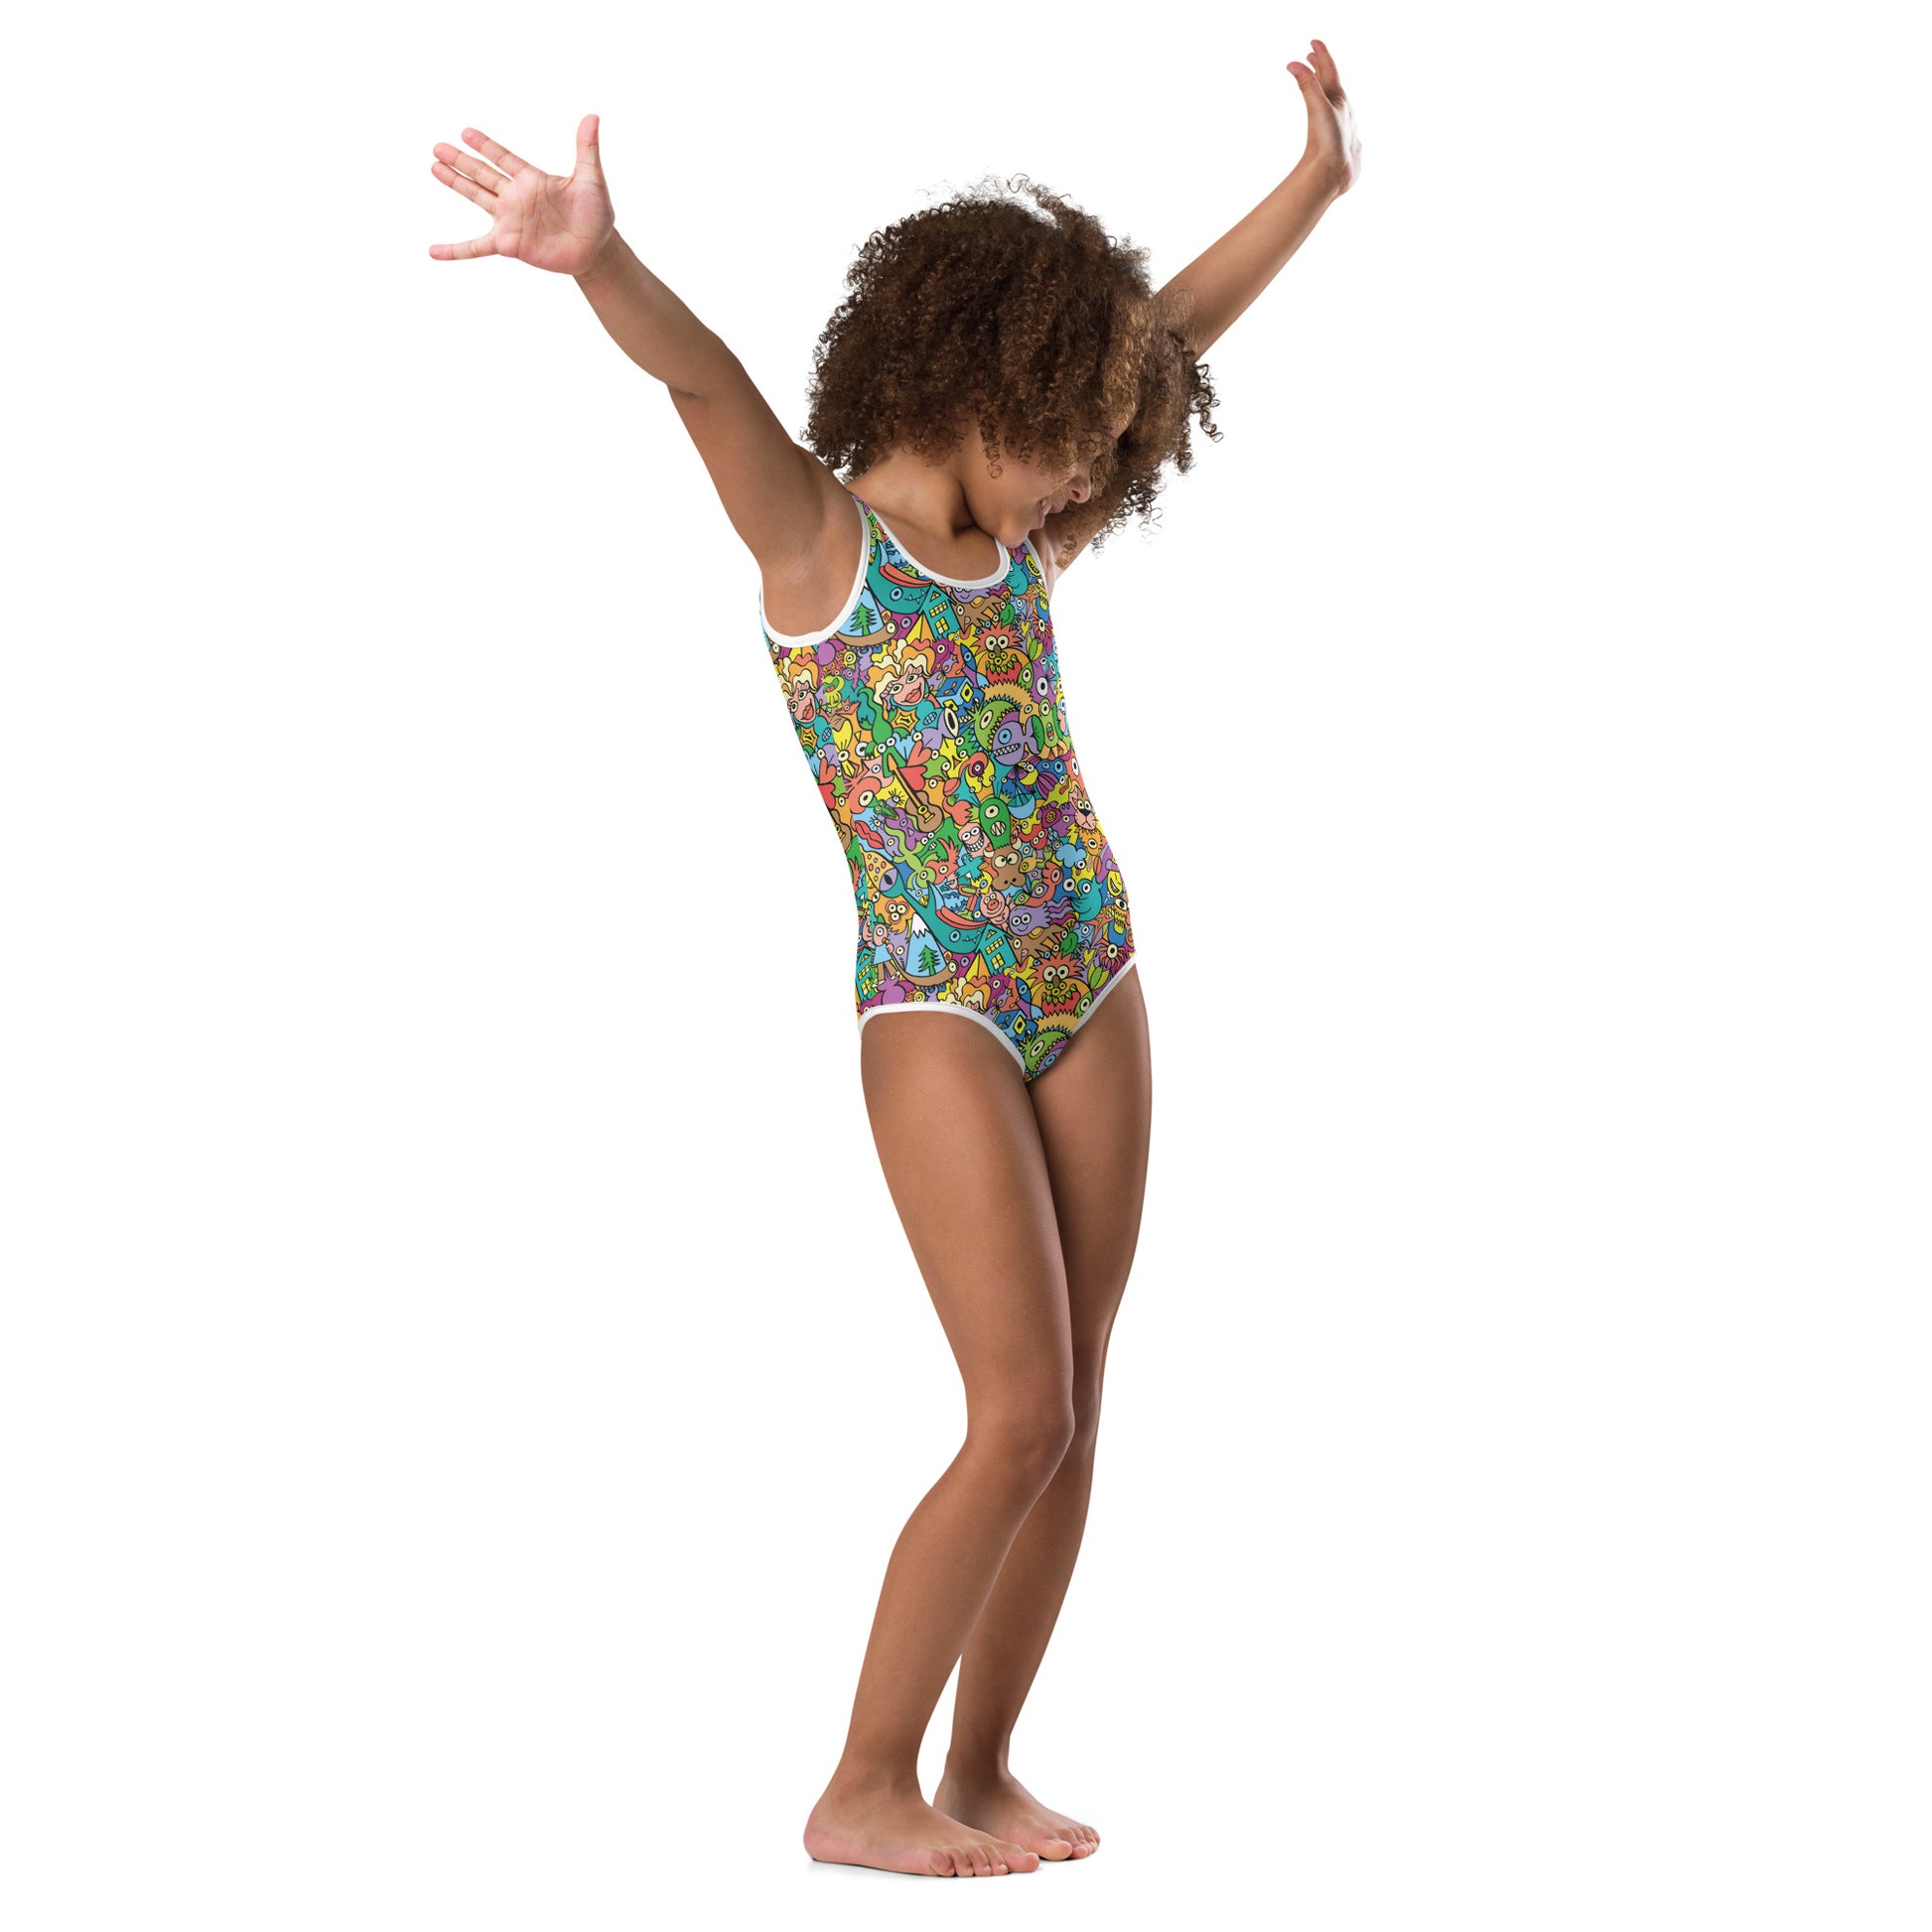 Cheerful crowd enjoying a lively carnival All-Over Print Kids Swimsuit. Side view